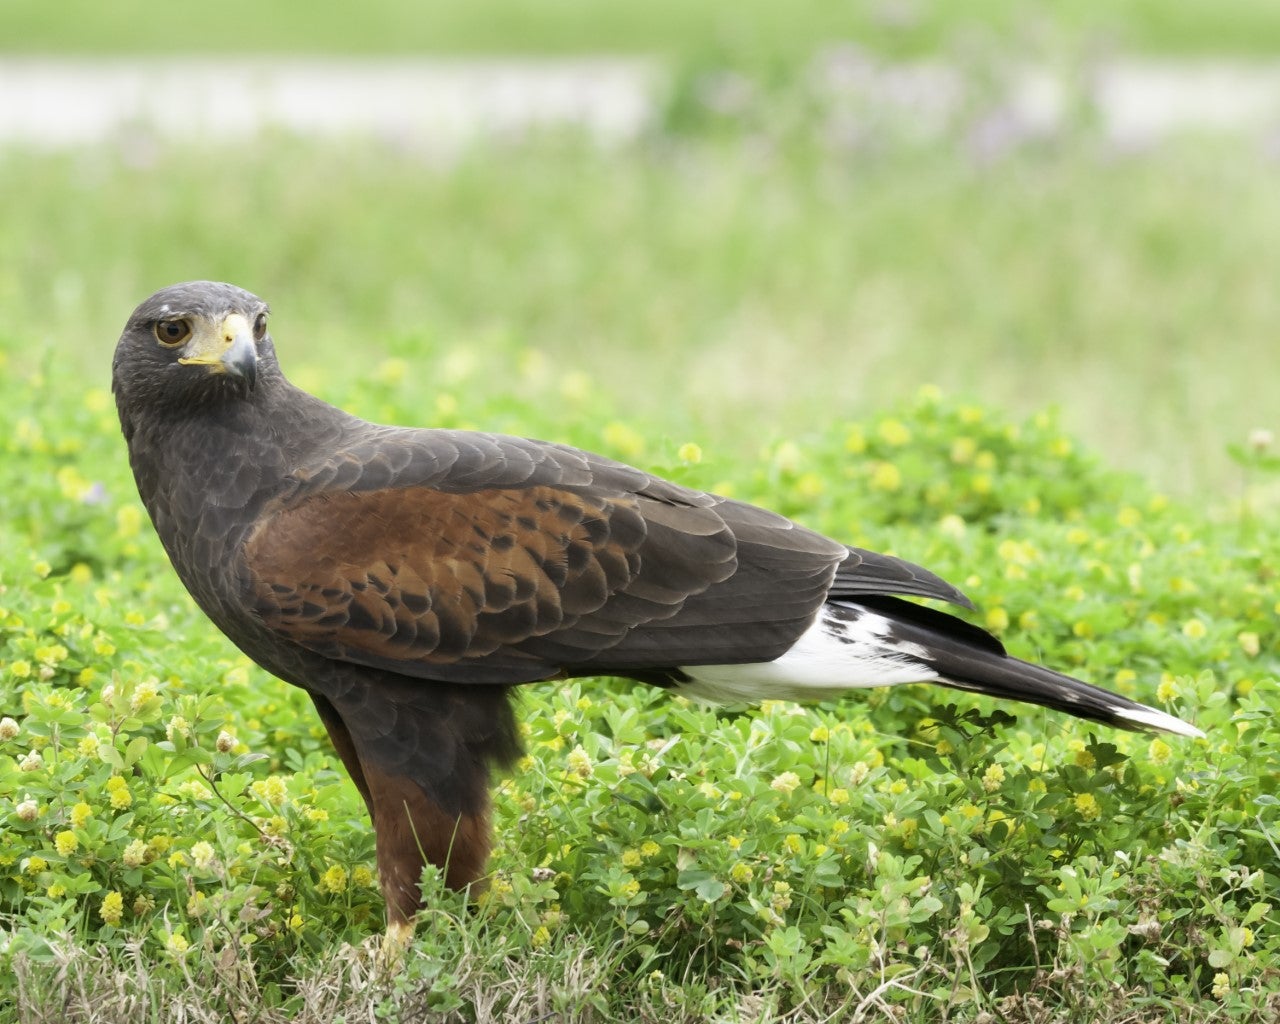 Fins, Feathers and Flowers 2020 kicks off with a Conservation Fair with representatives from various conservation organizations and a live bird presentation featuring a Harris’s hawk.